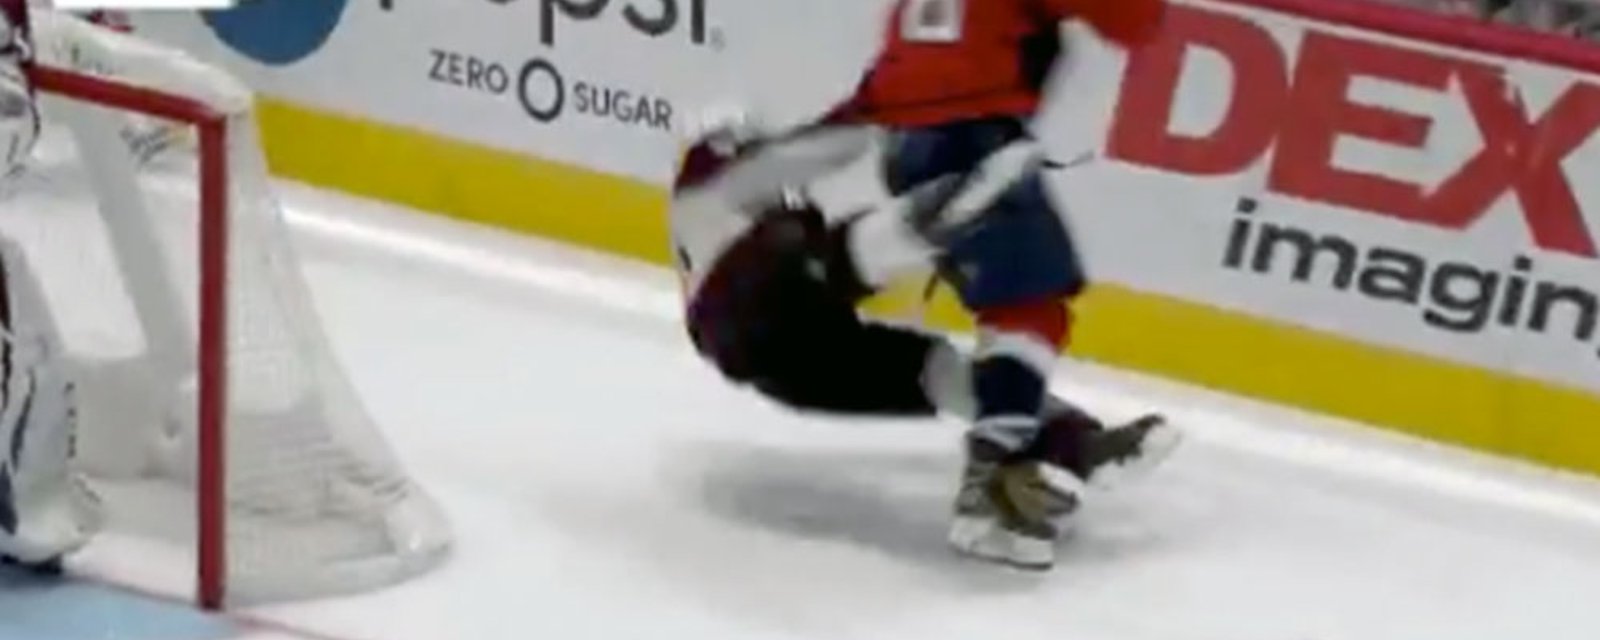 Ovechkin absolutely obliterates Girard with an early hit of the year candidate